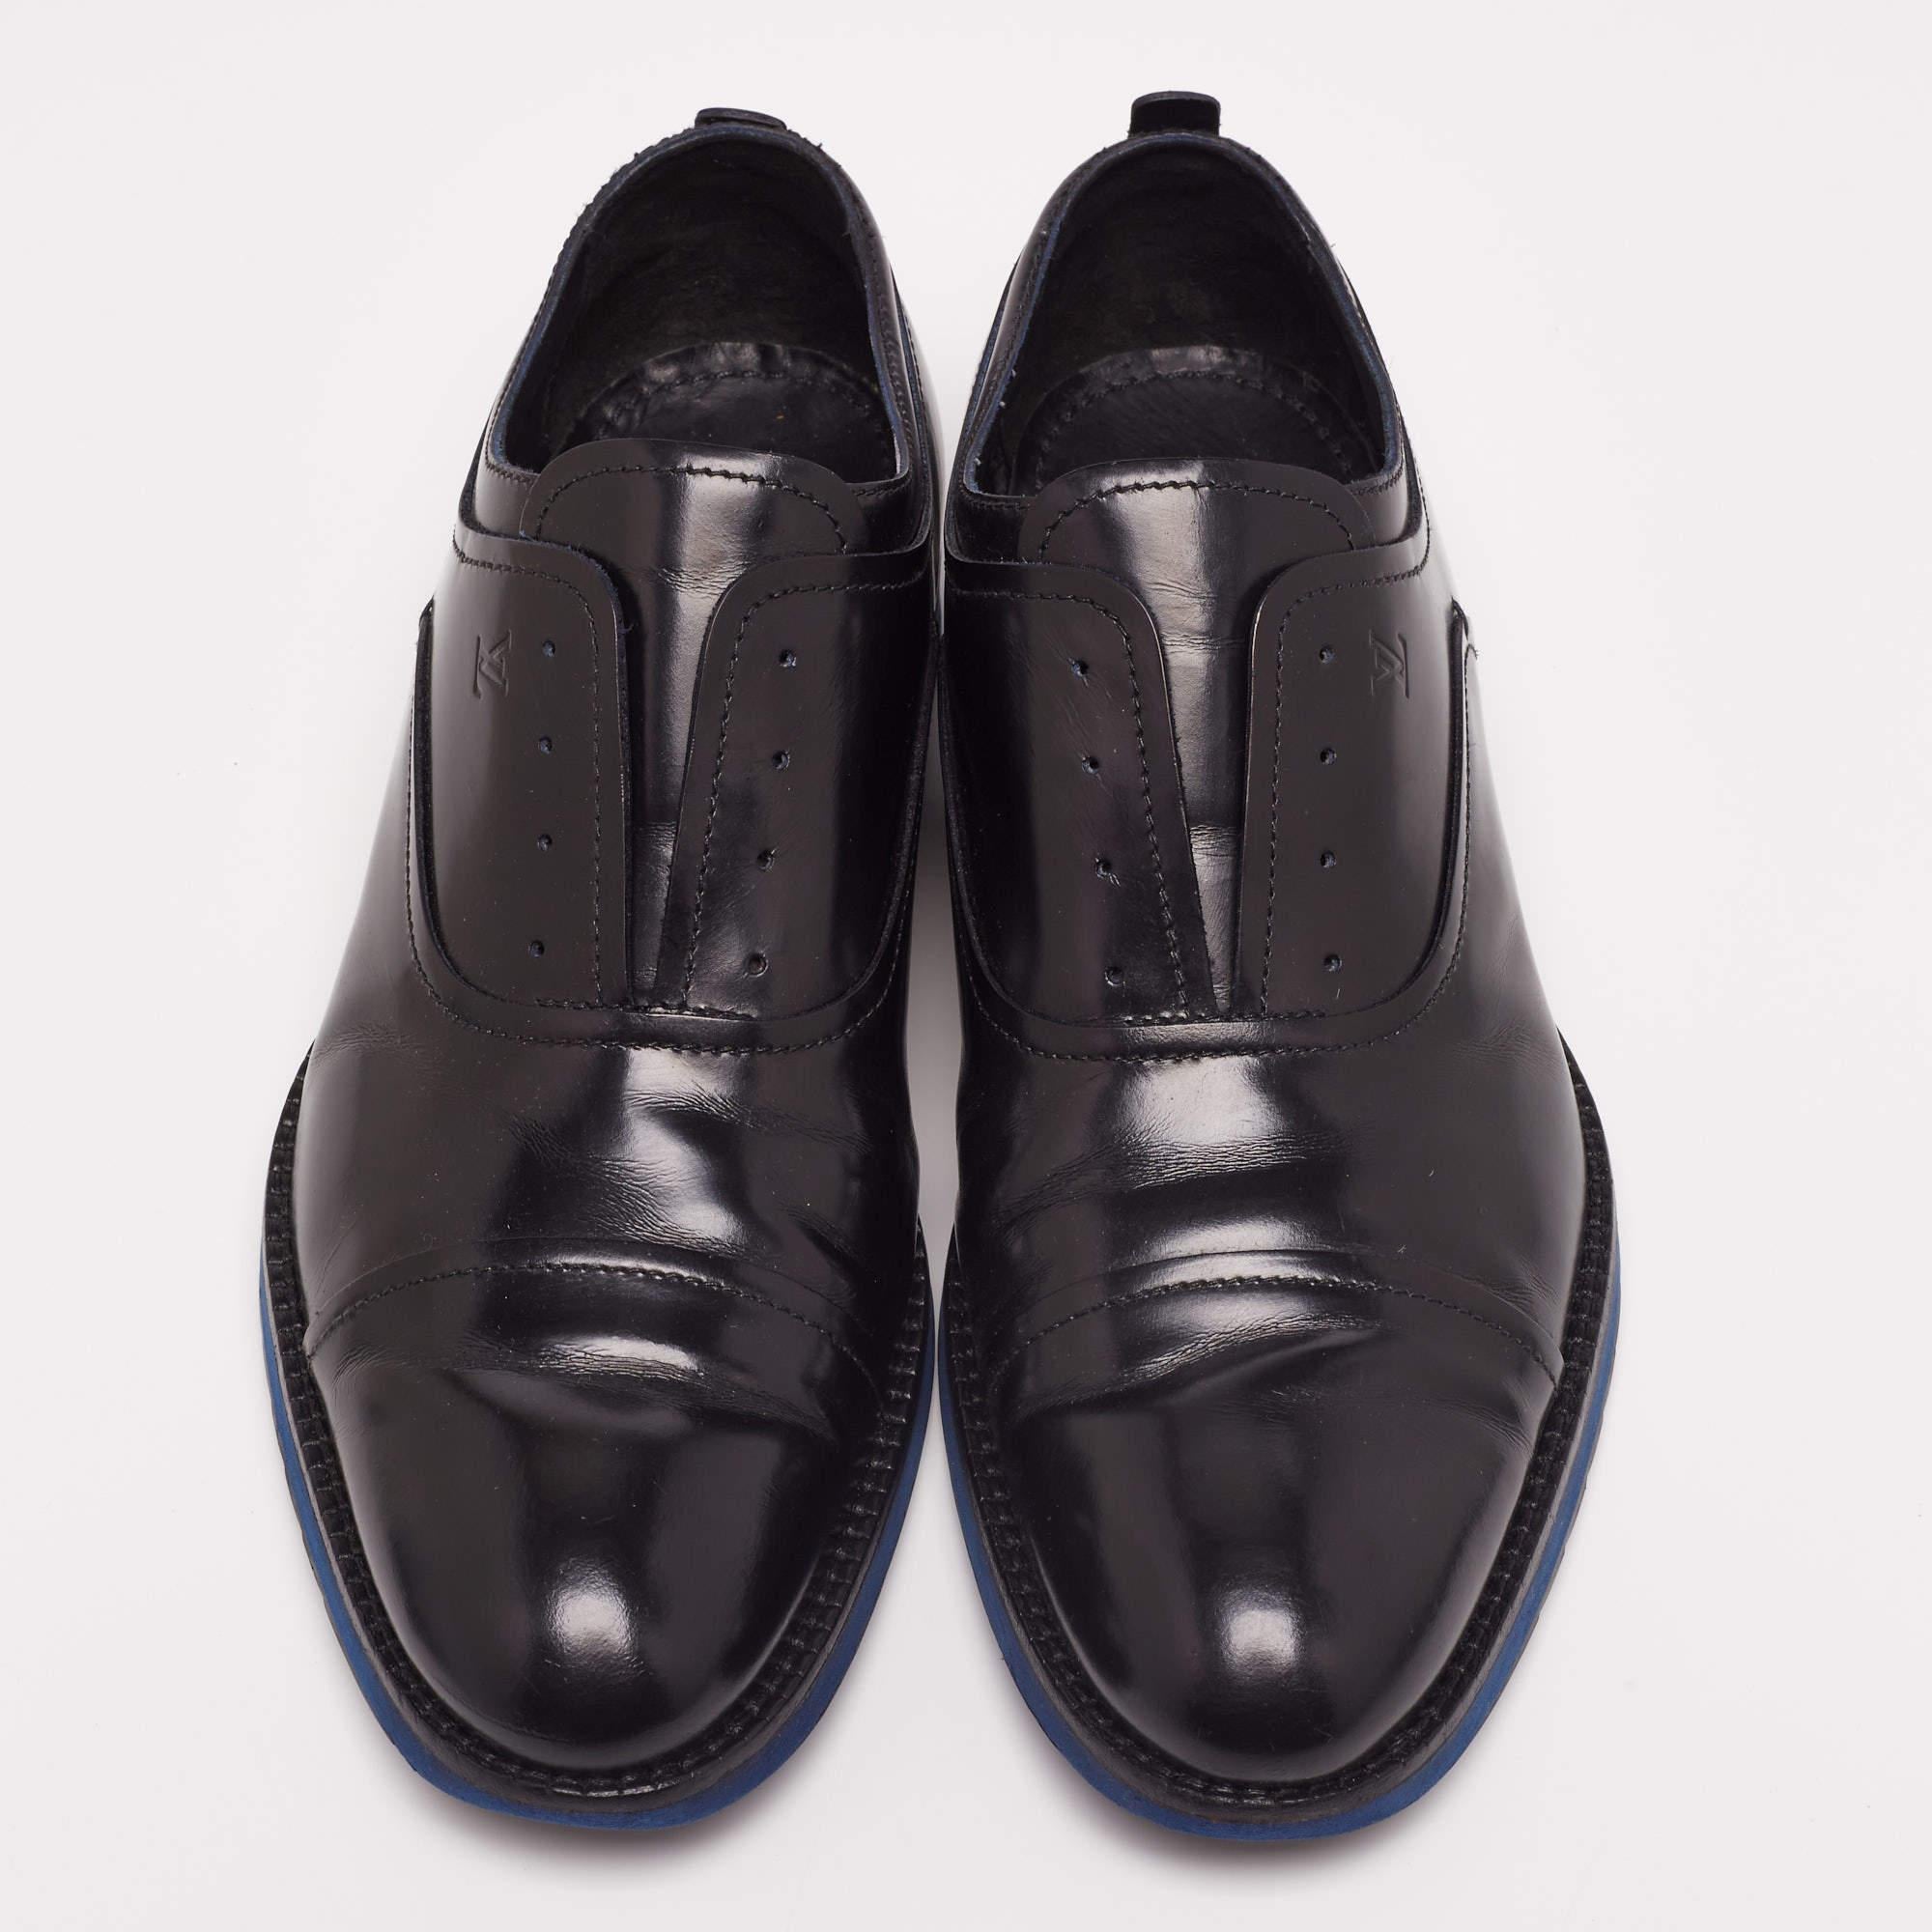 These shoes by Louis Vuitton are notable for their sleek and understated design. Crafted from black leather, they feature cap toes. They are finished with tough outsoles for suppleness and resistance to slips and wear.

